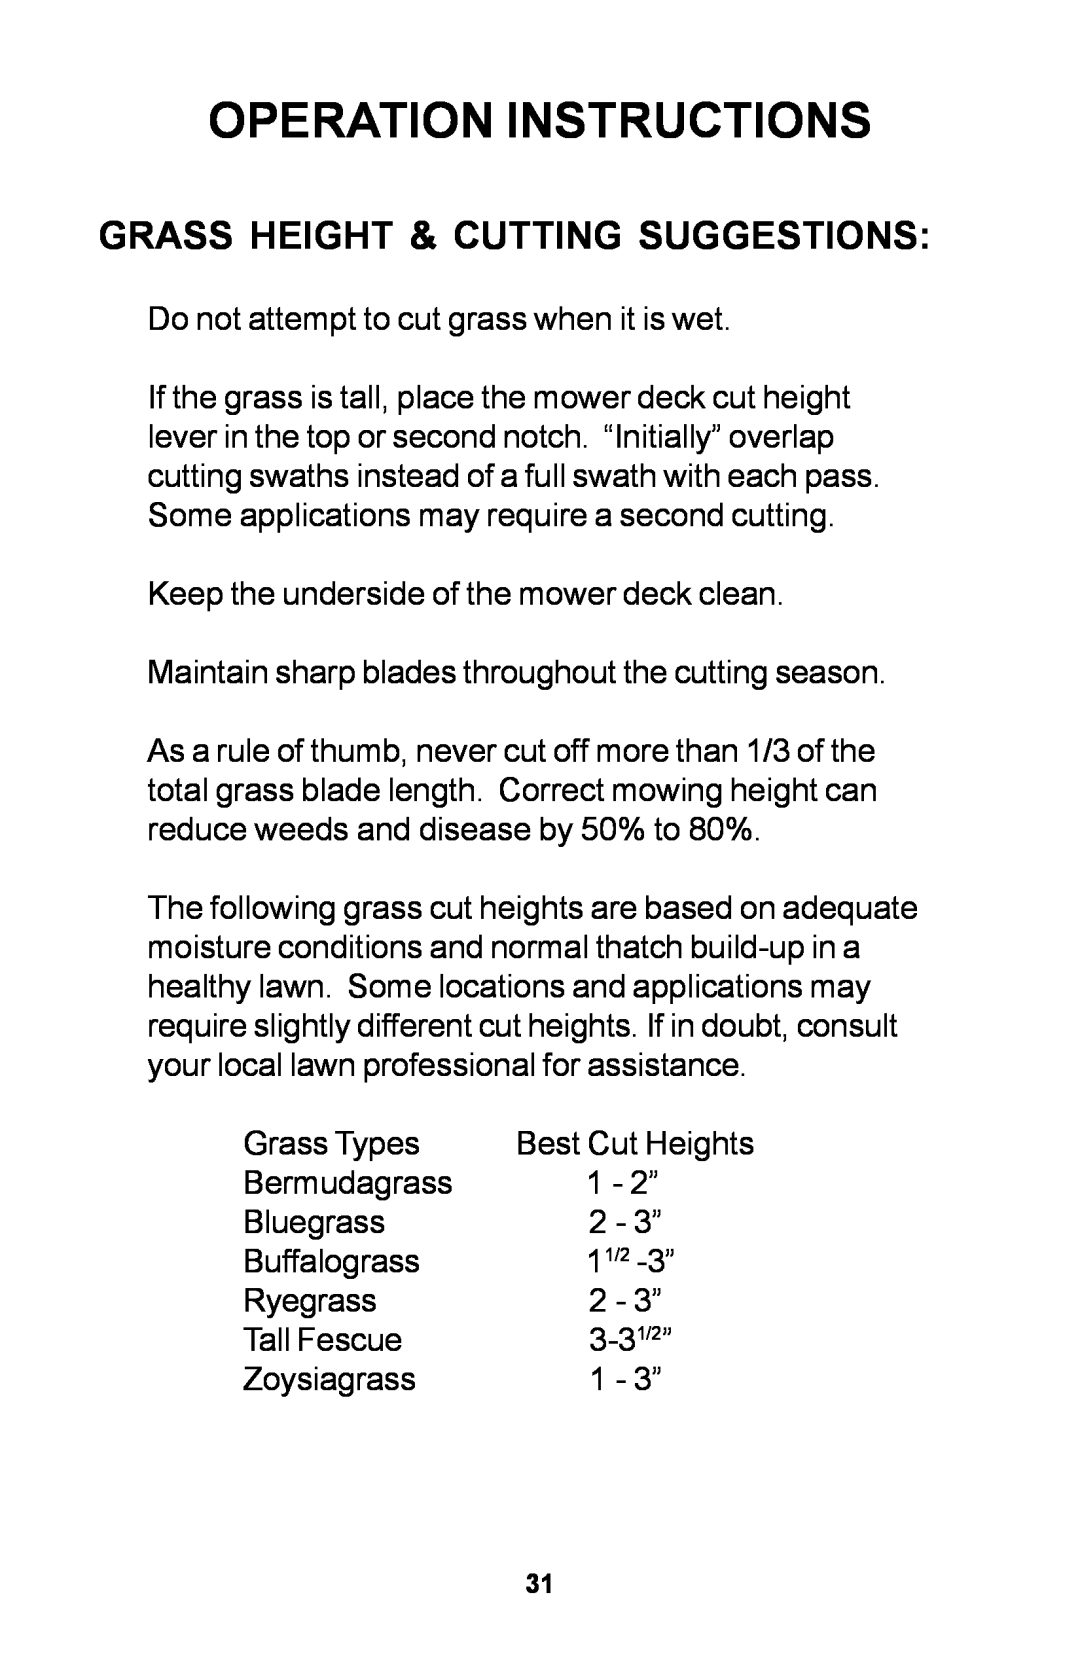 Dixon ZTR manual Grass Height & Cutting Suggestions, Operation Instructions 